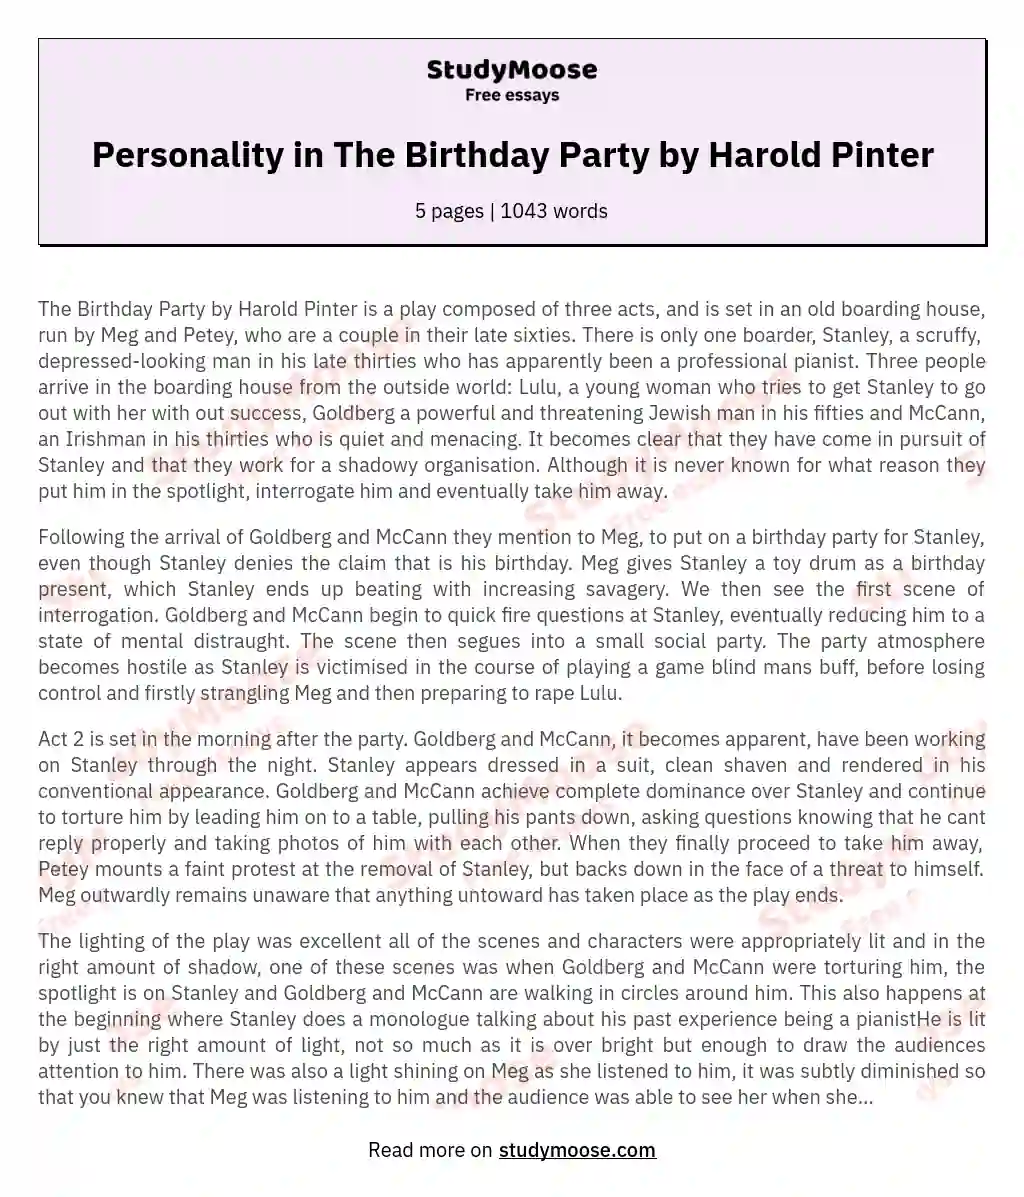 Personality in The Birthday Party by Harold Pinter essay